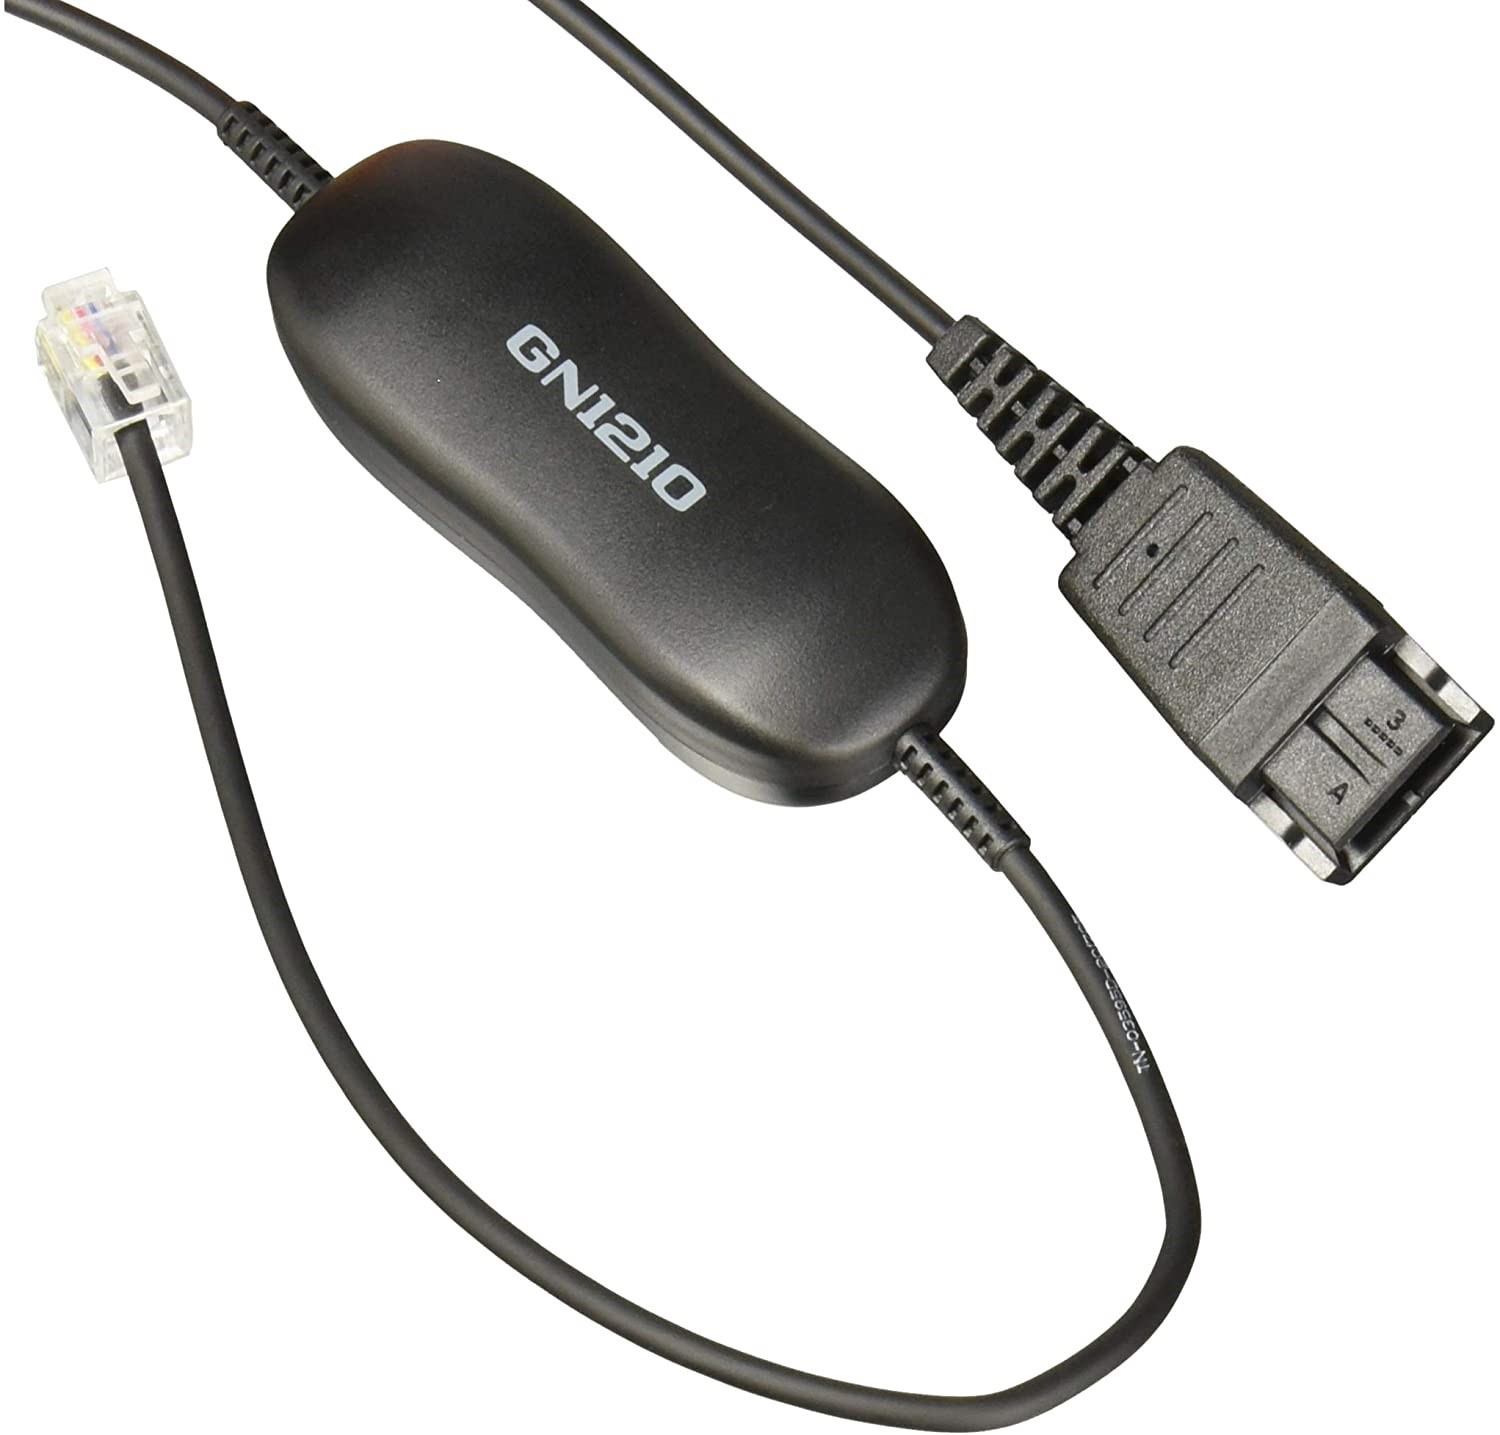 JA-88001-96 The Jabra GN1221 is a cable that provides affordable connectivity to a wide variety of phone systems.